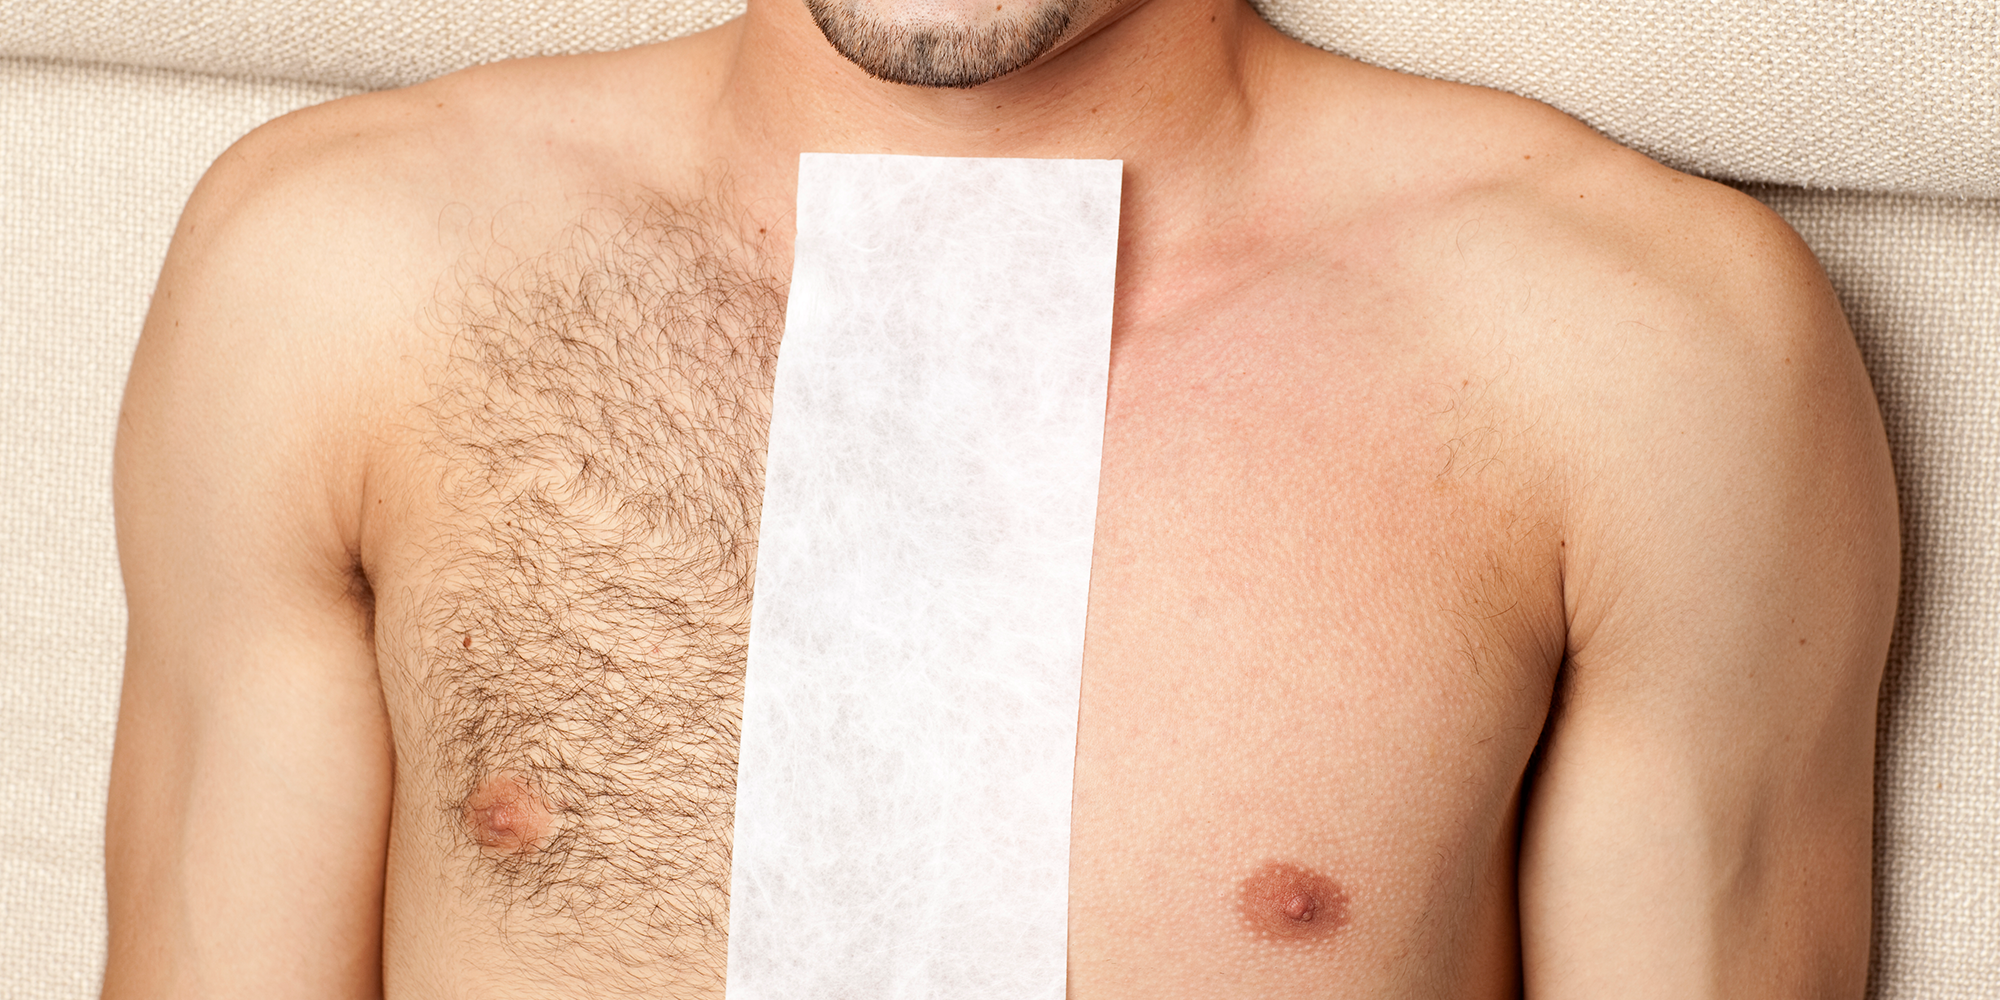 Body Waxing For Men - 7 Steps For Easy Hair Removal